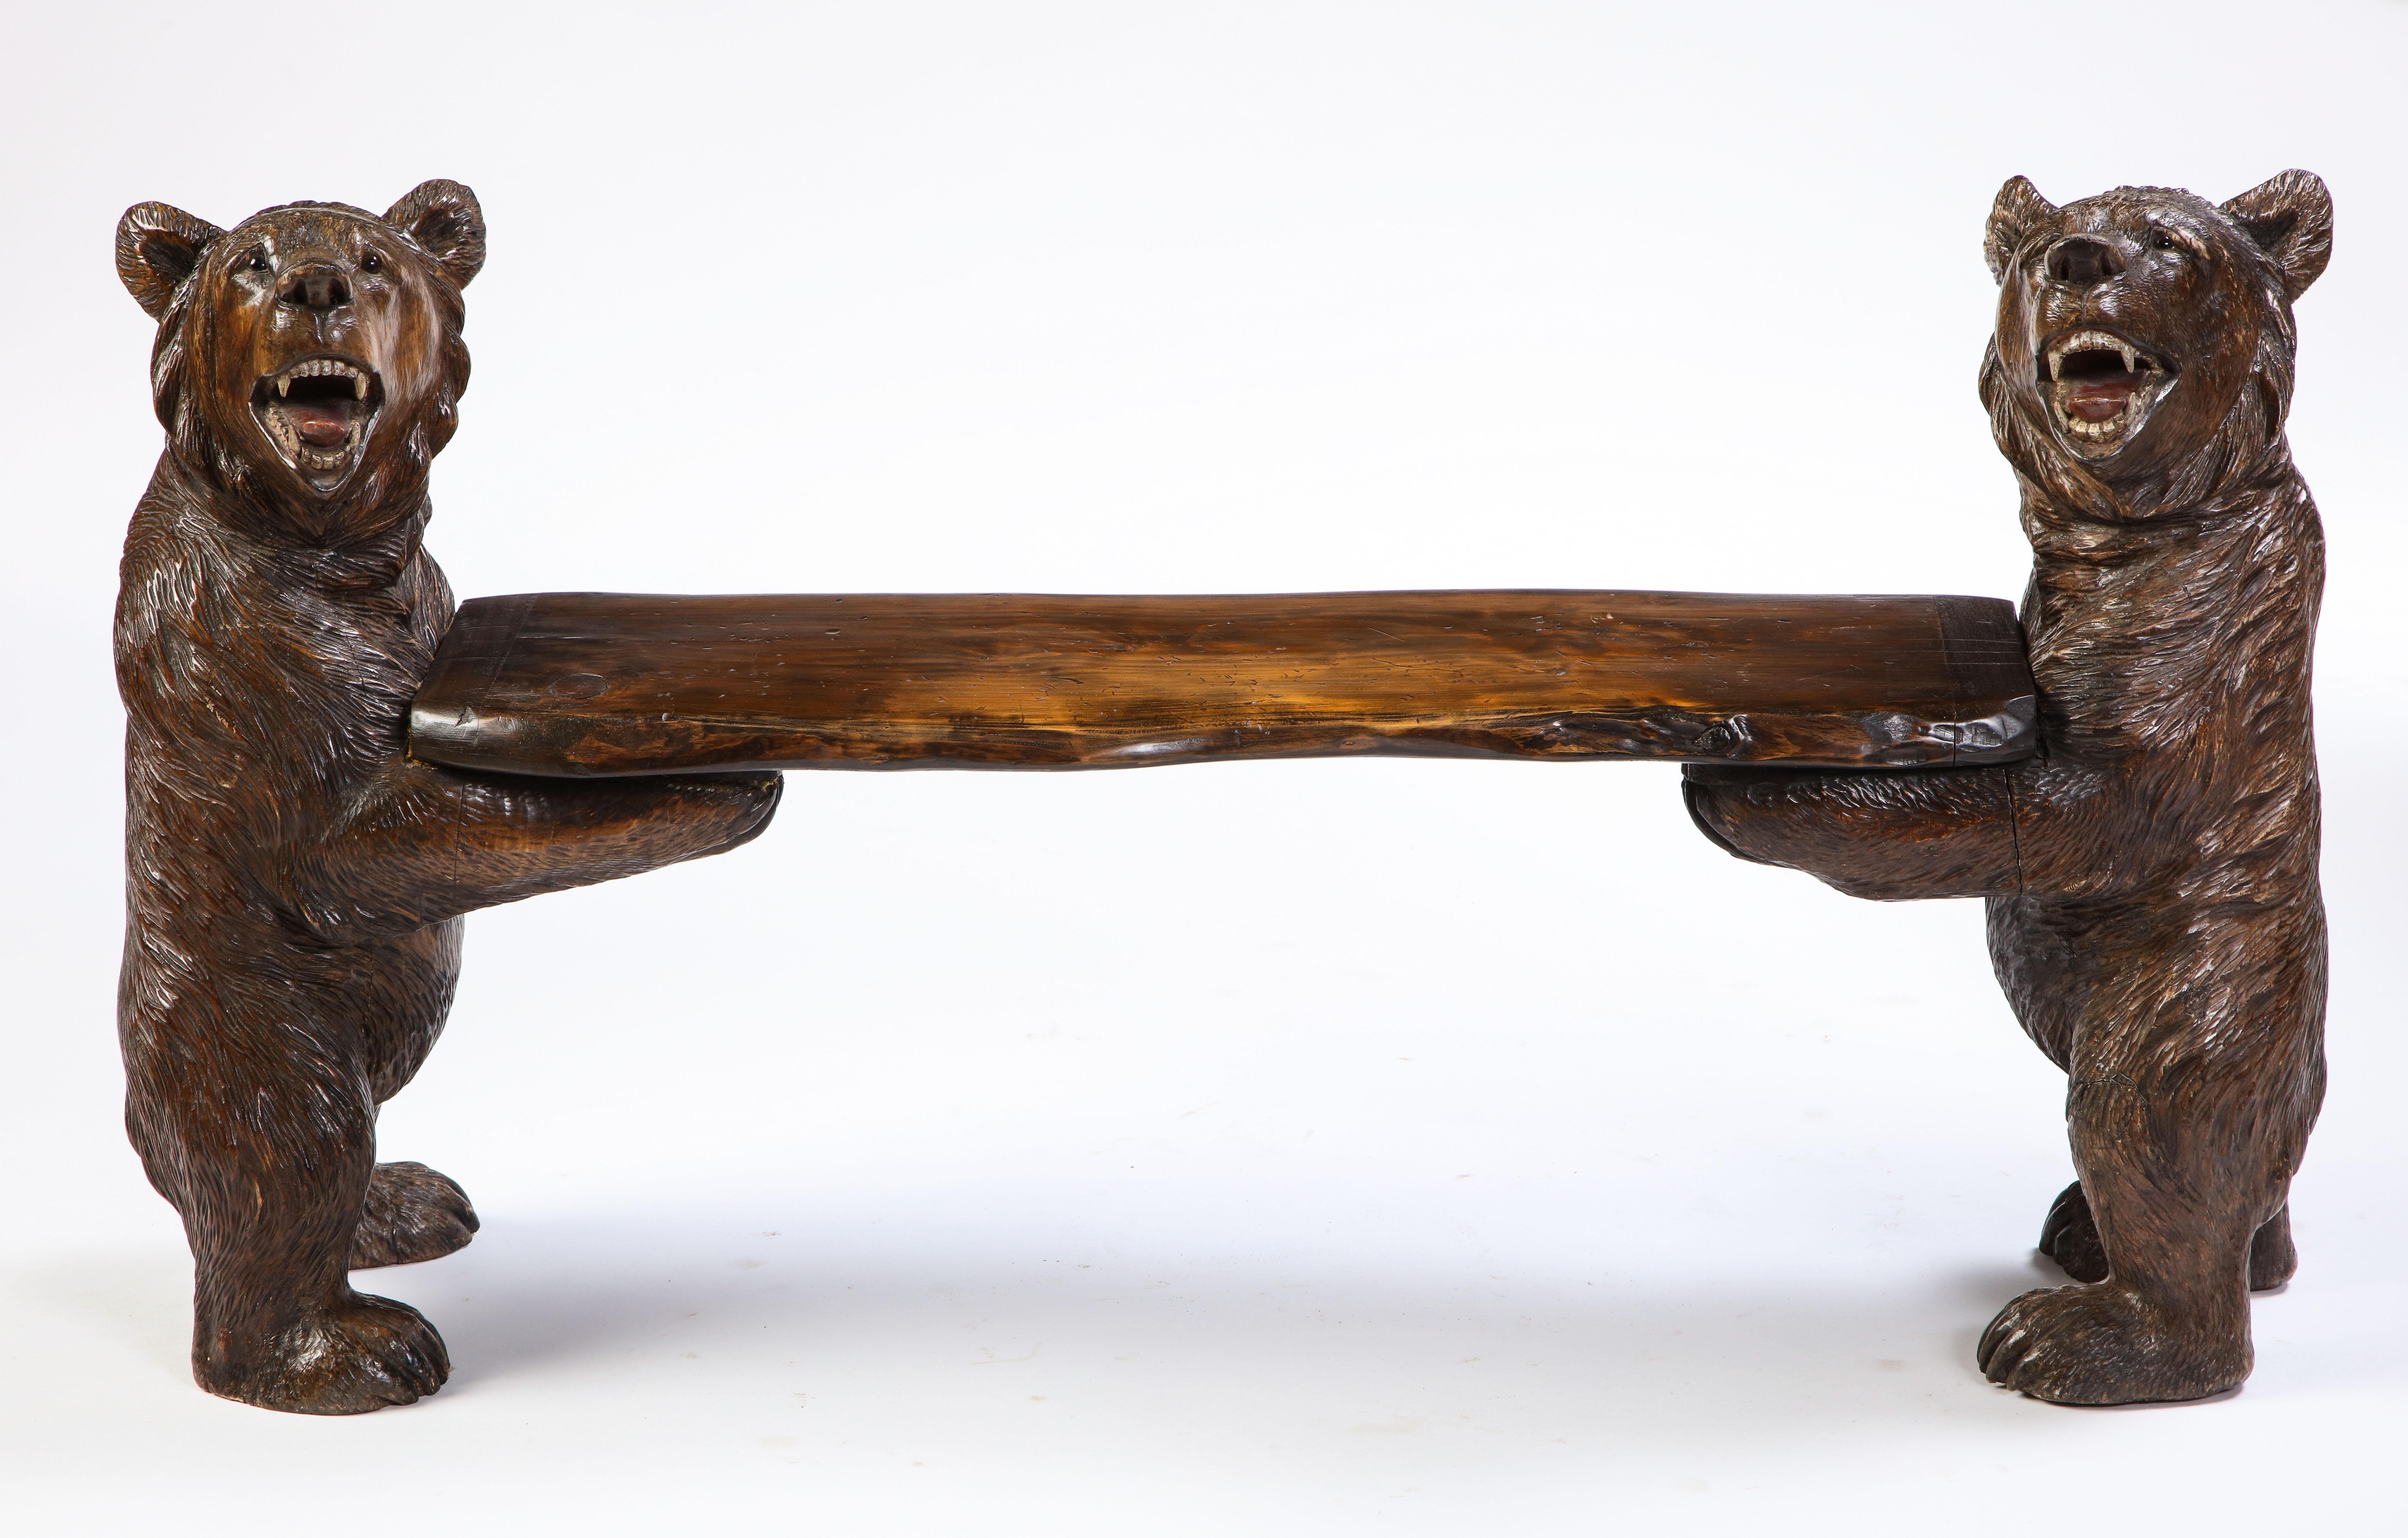 Two expressively carved wooden bears form the legs supporting a plain seat rail in this 20th century Swiss 'Black Forest' small wood bench. The seat rail is composed of a polished and varnished live-edge form plank. This simple Alpine form has